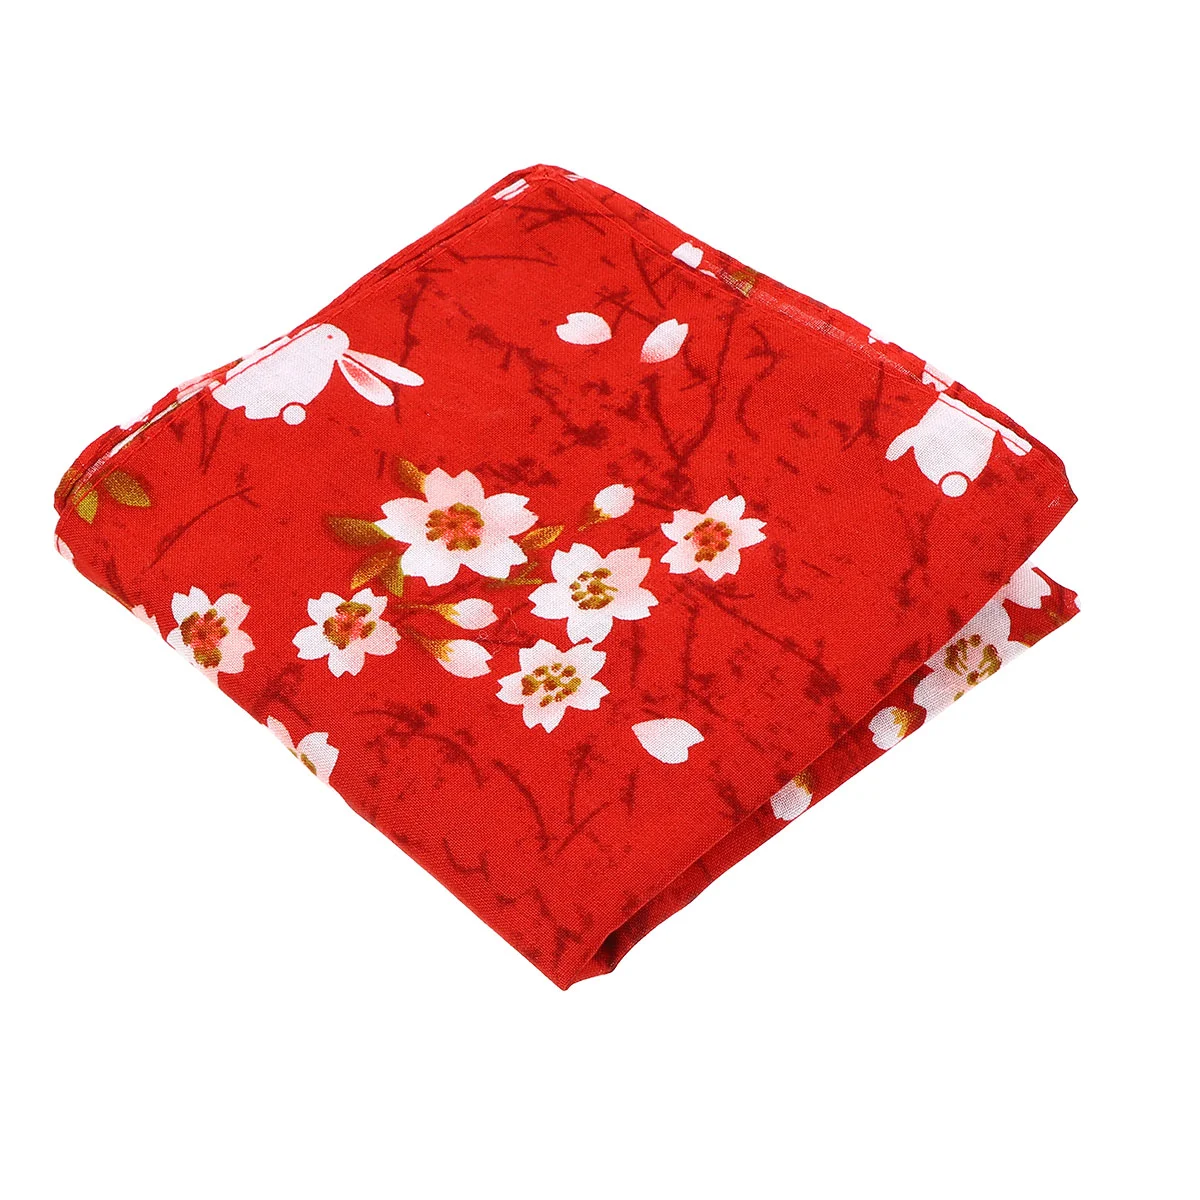 

Bento Lunch Bag Small Handkerchief Japanese Fabric Box Soft Wrapping Cloth Quilted Sailor Moon